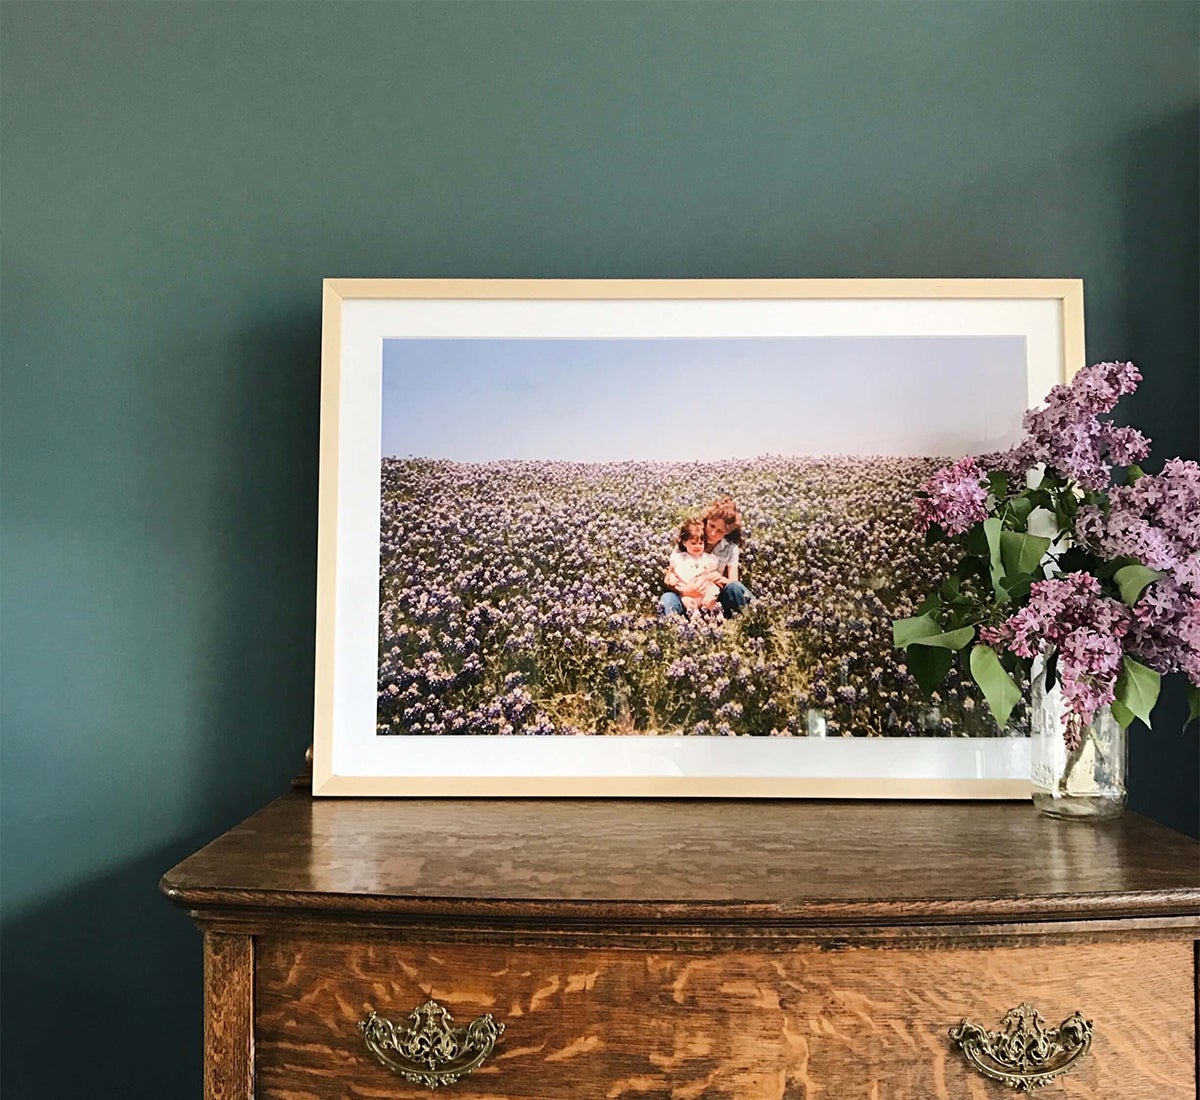 Gallery frame with vintage mother and daughter photo resting on dresser